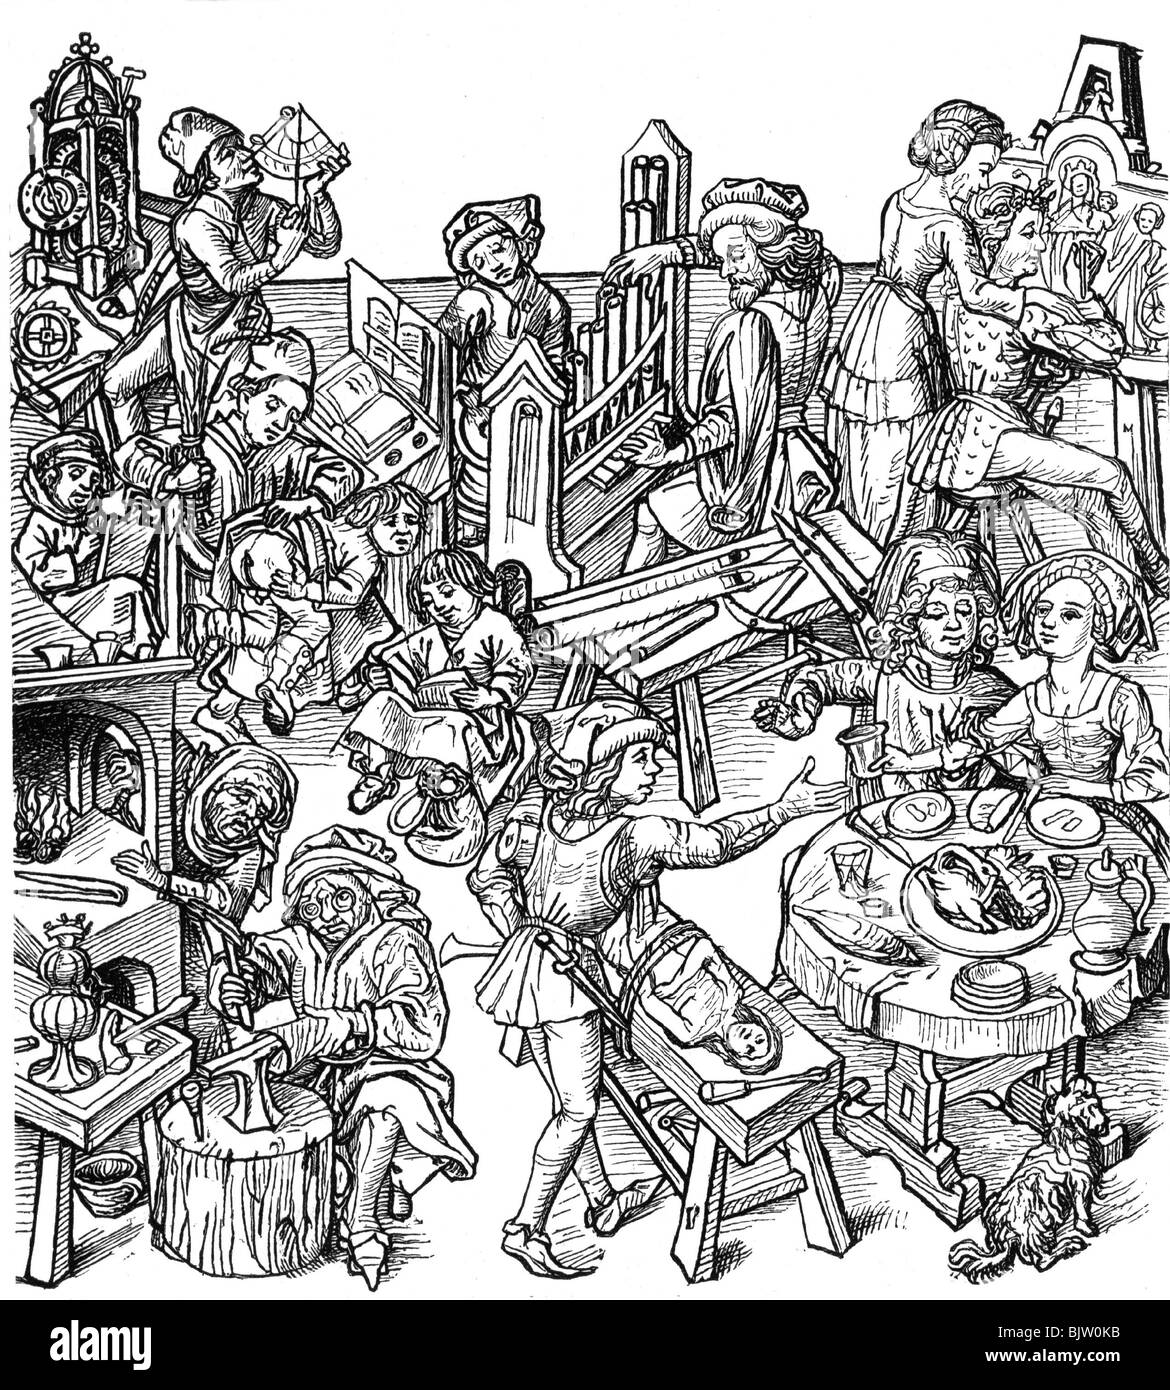 Middle Ages, from life of German bourgeois, 15th century, historic, historical, master, masters with pupil, student, pupils, students, watchmaker, clockmaker, watchmakers, clockmakers, organ builder, organ builders, painter, goldsmith, goldsmiths, sculptor, sculptors, eating, dinner, meal, couple, profession, professions, people, medieval, Stock Photo